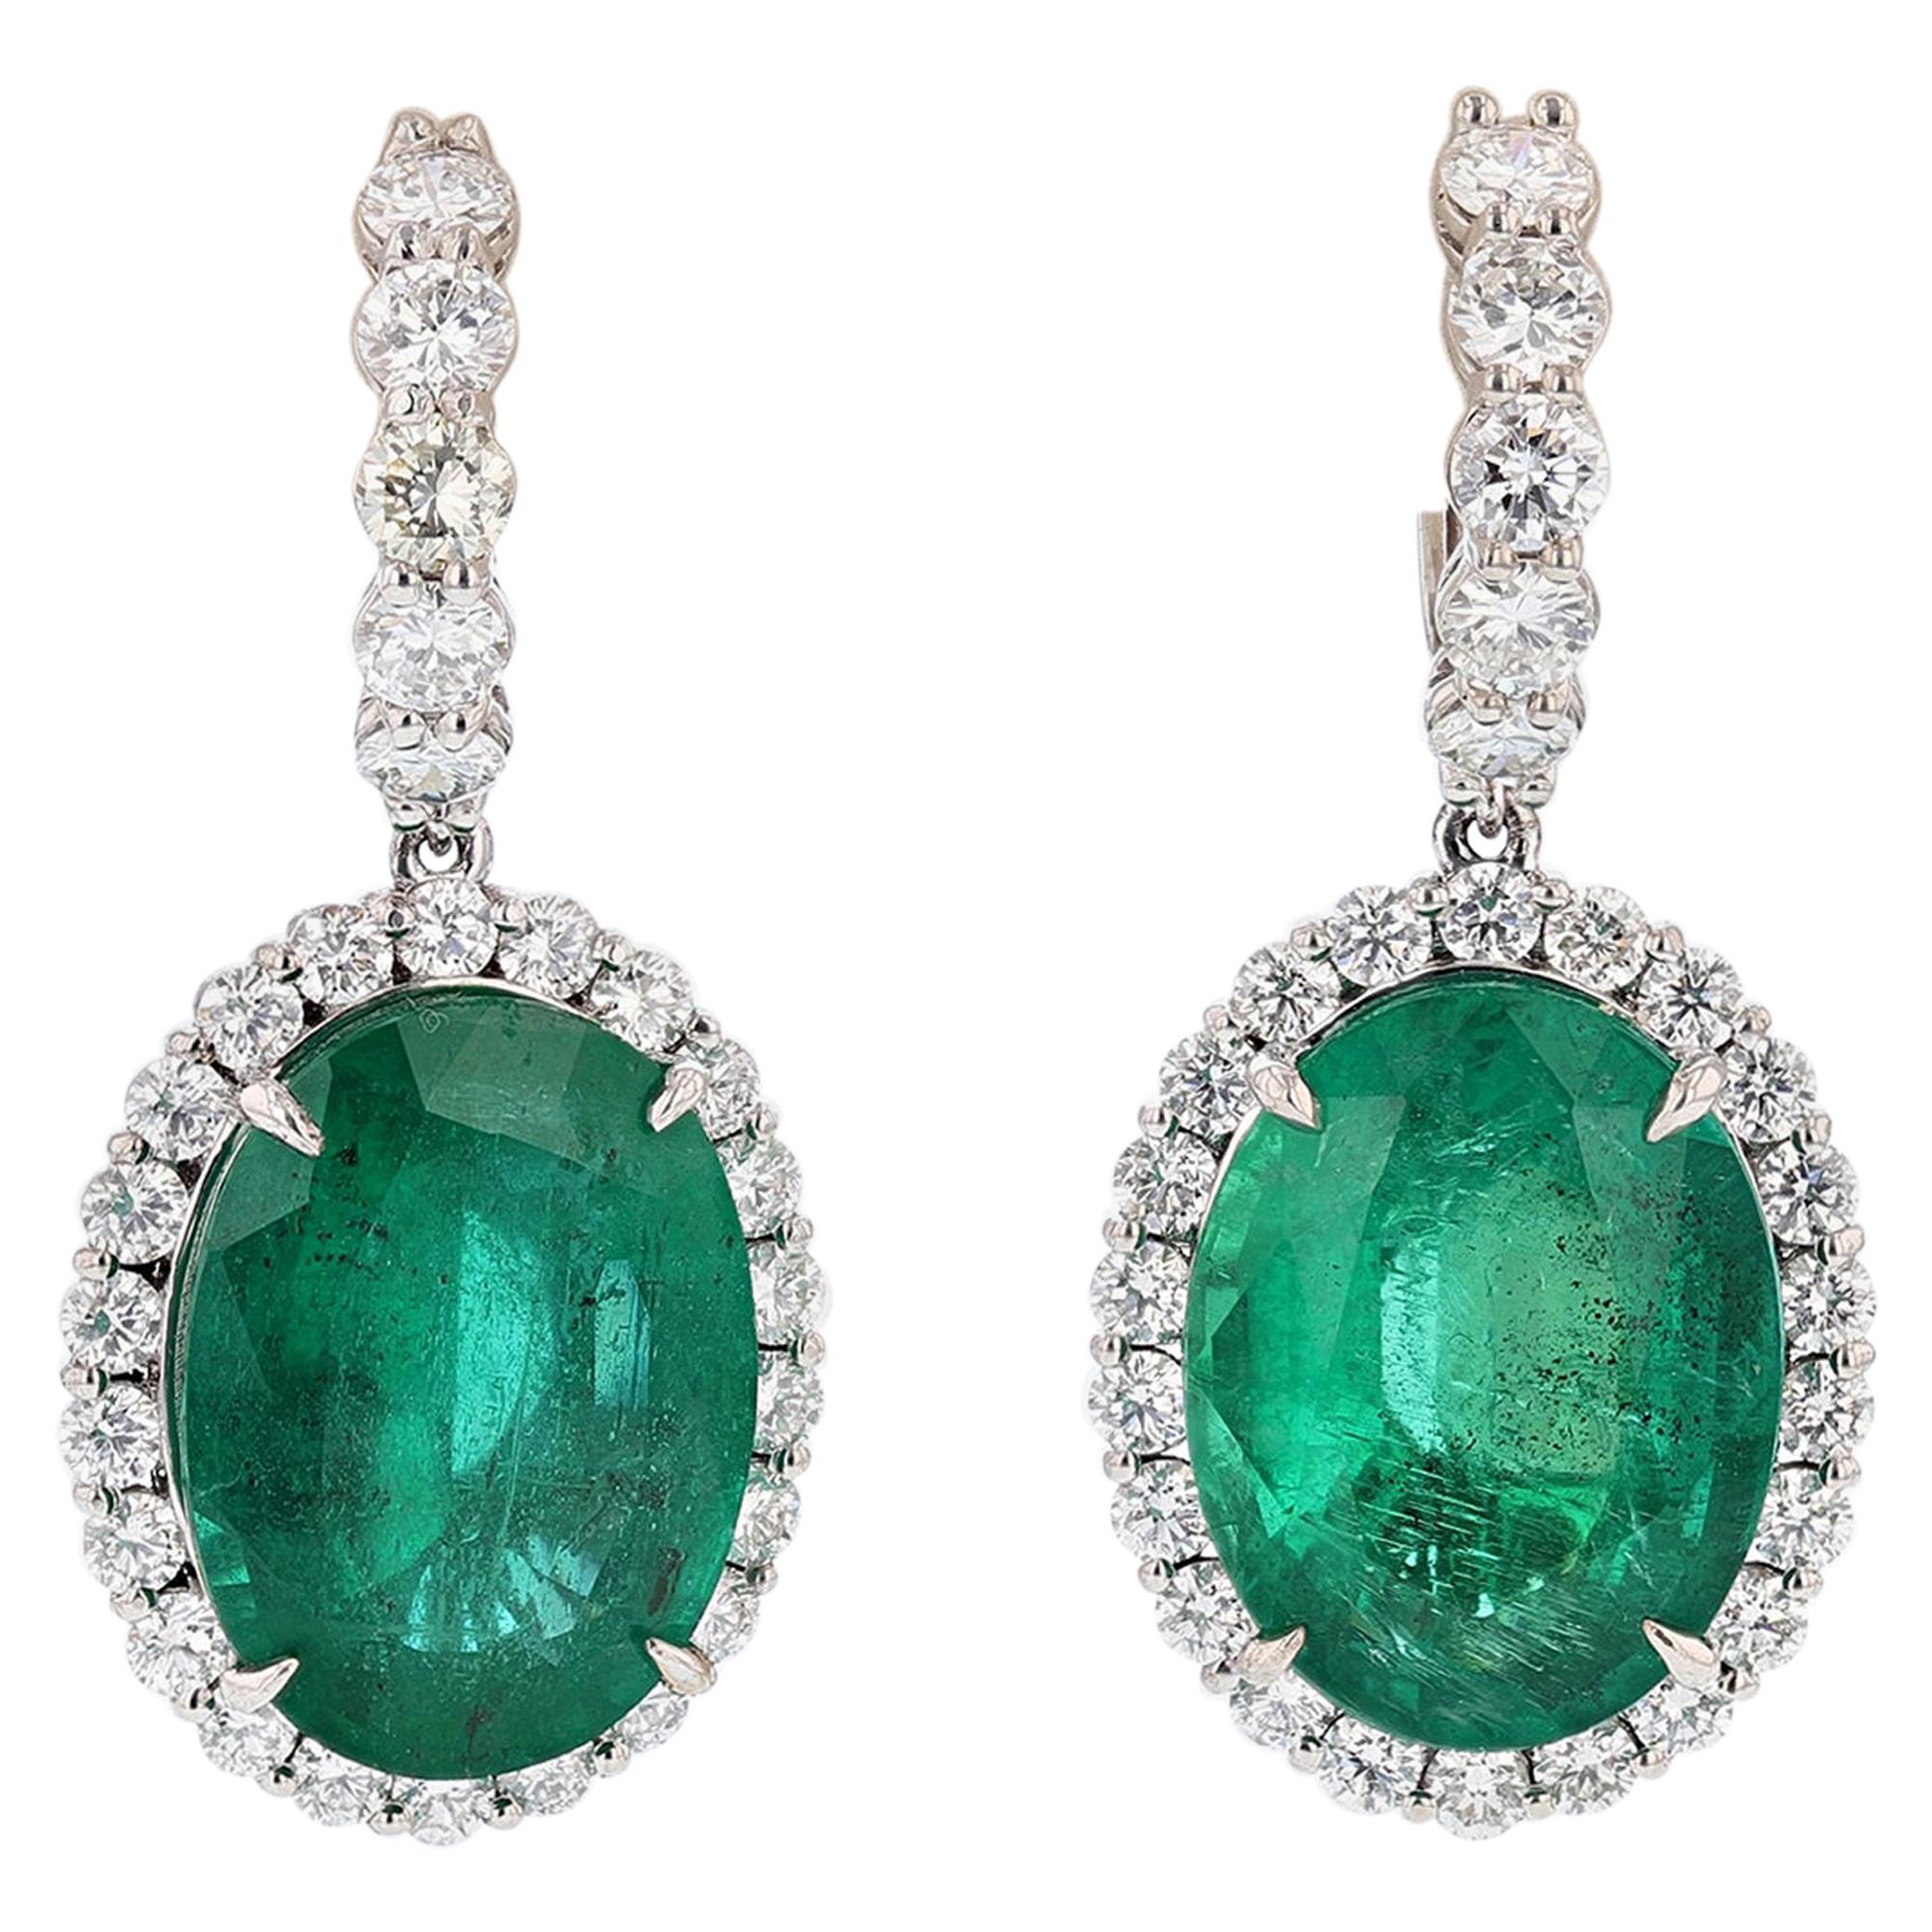 GIA Certified 24.88 Carat Oval Colombian Green Emerald and Diamond Earrings